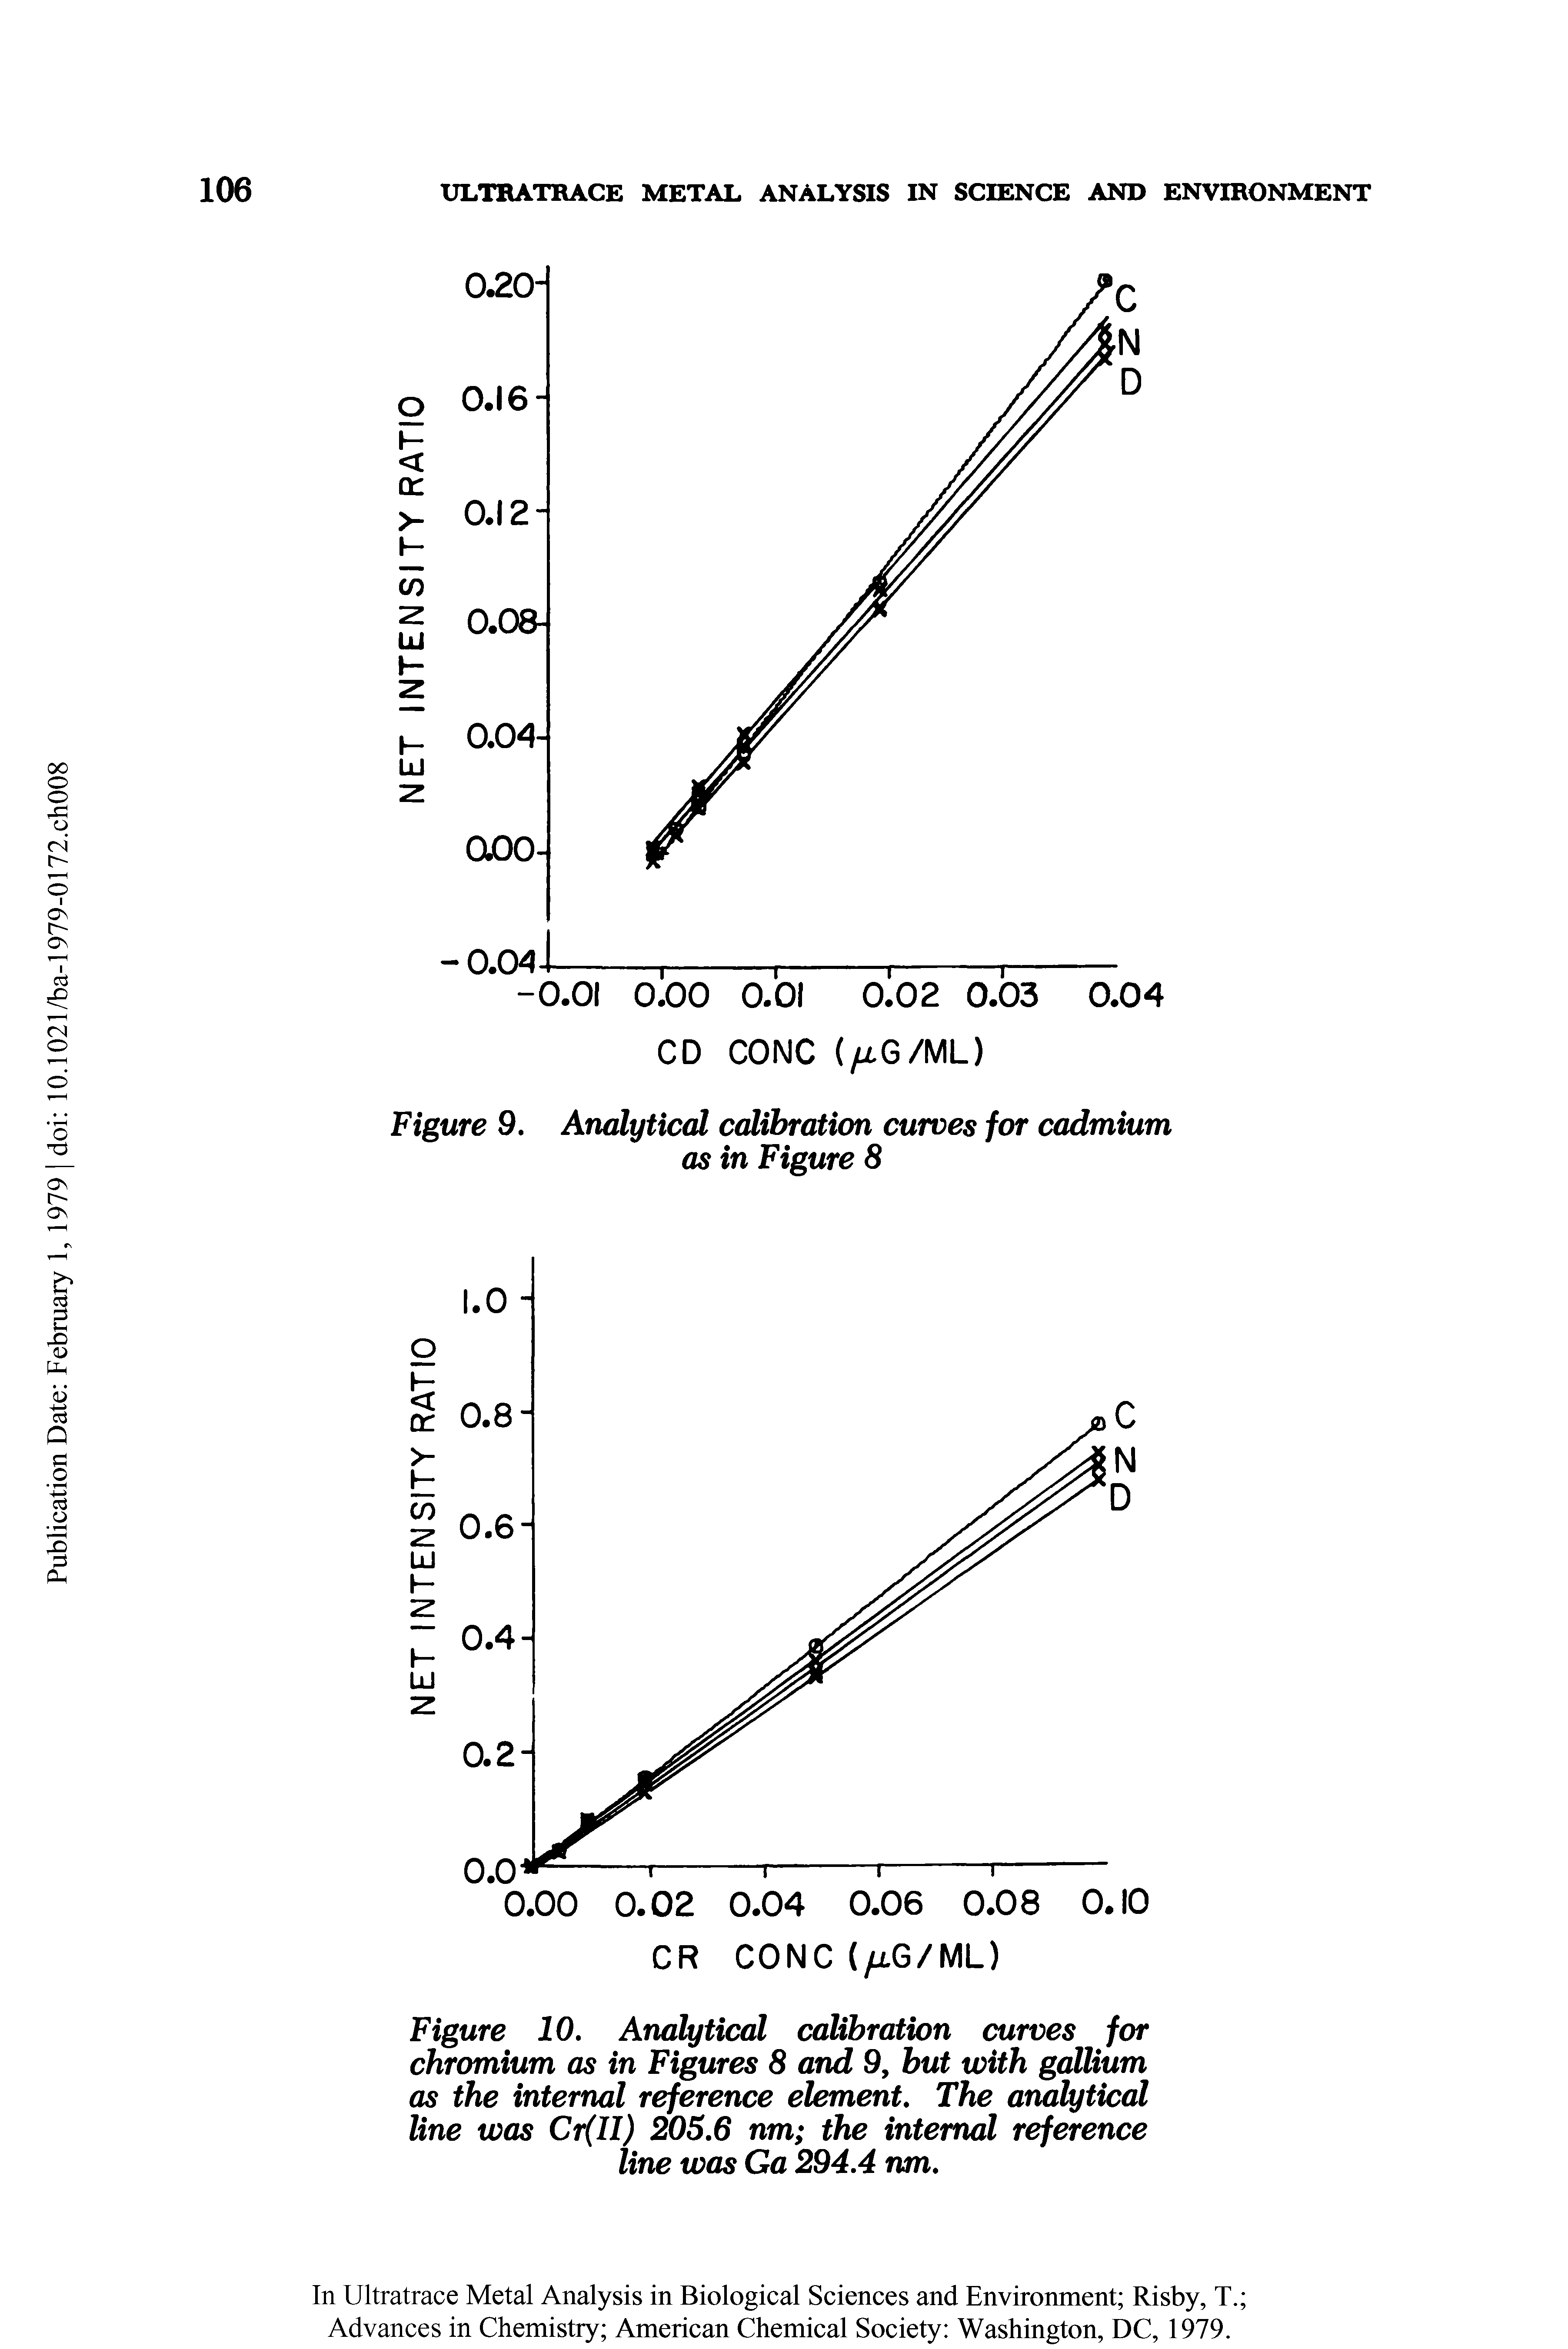 Figure 10, Analytical calibration curves for chromium as in Figures 8 and 9, but with gallium as the internal reference element. The analytical line was Cr(II) 205,6 nm the intenml reference line was Ga 294,4 nm.